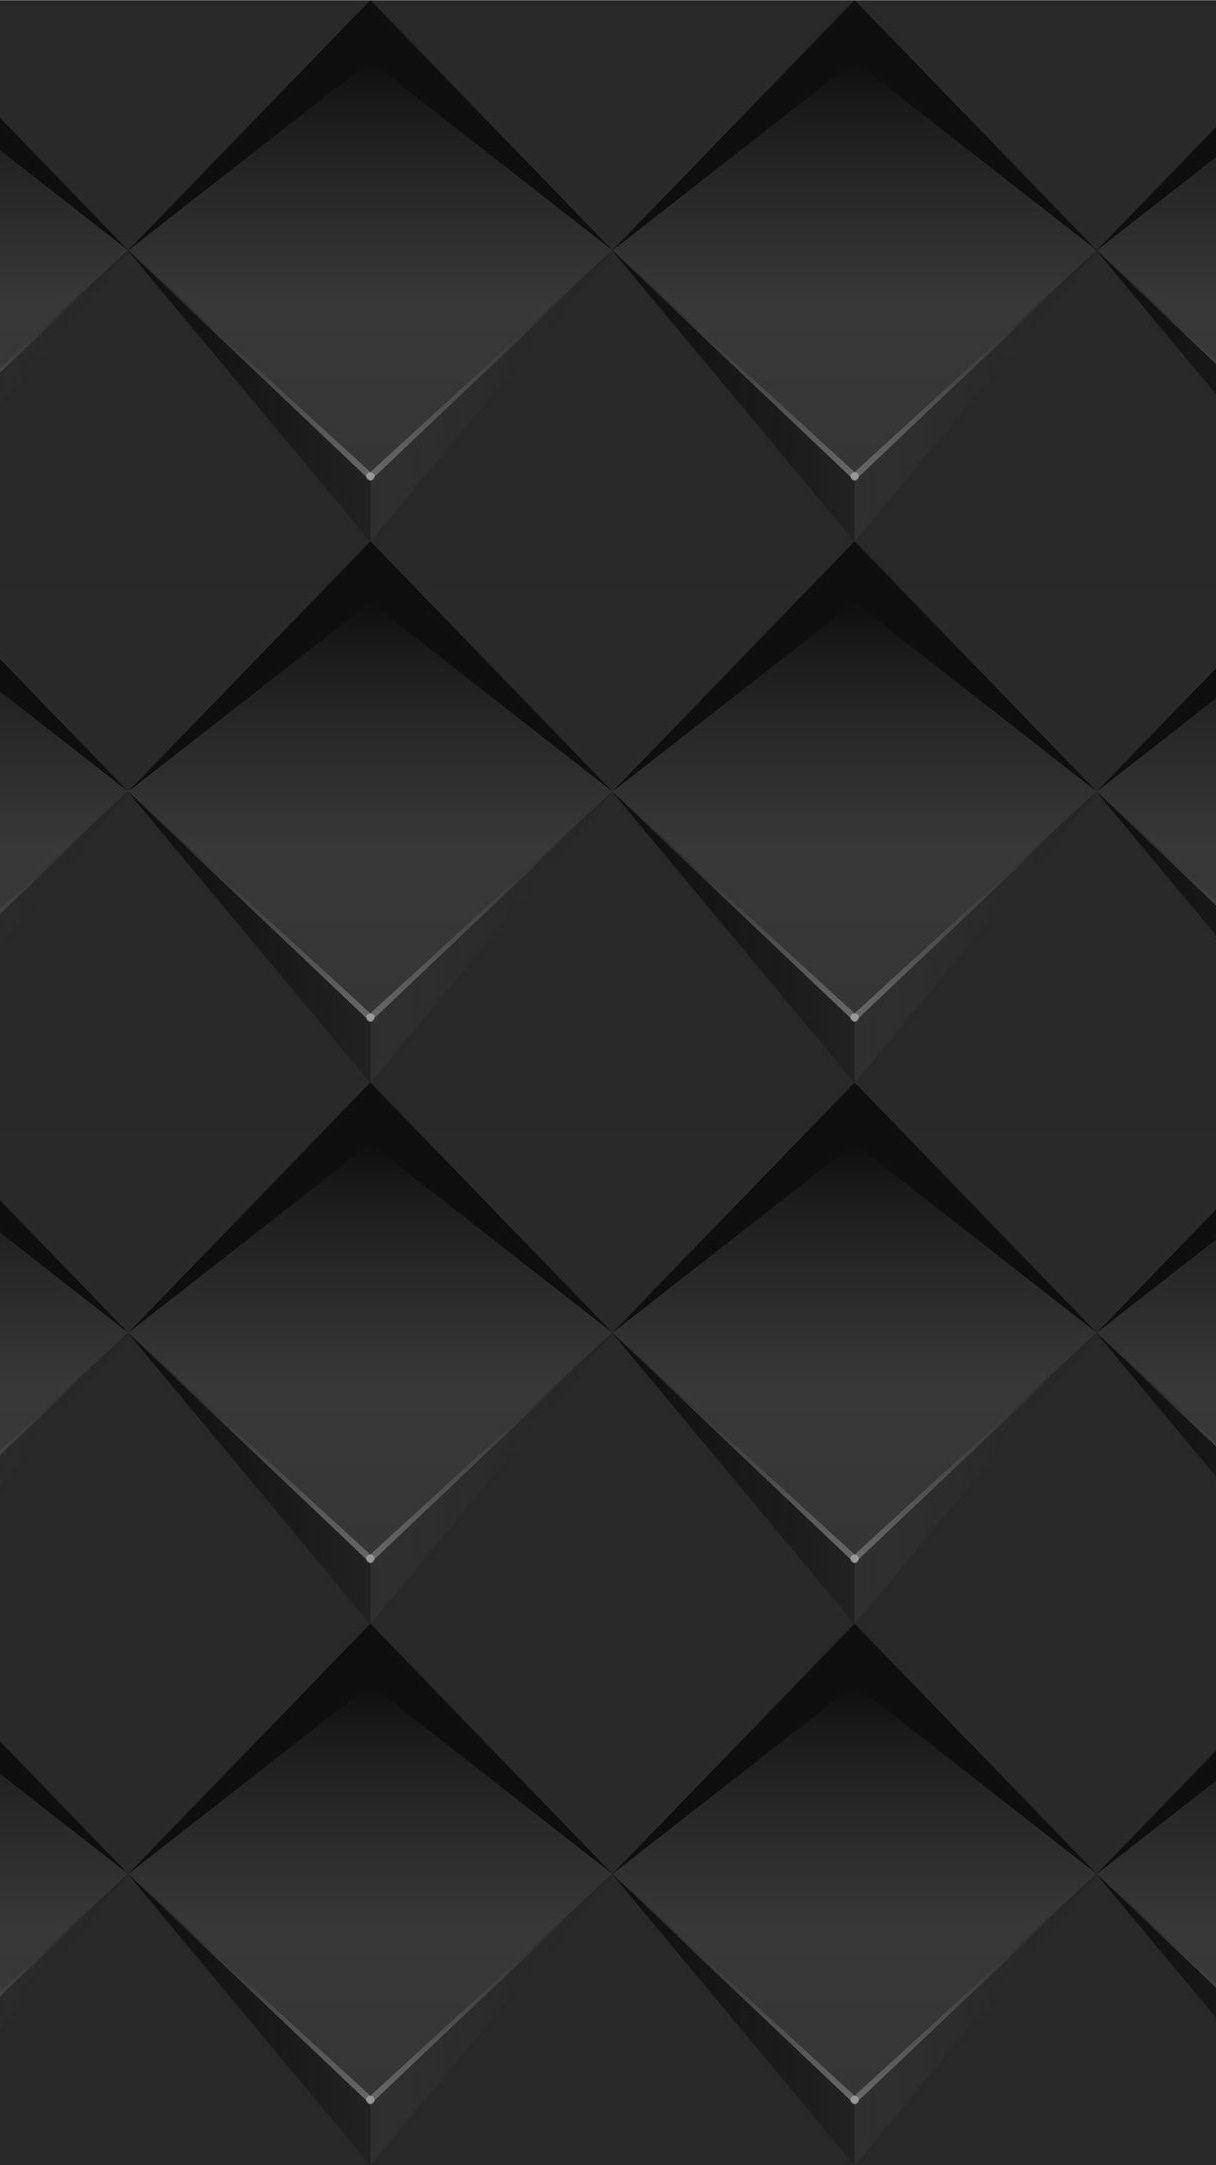 iPhoneXpapers - vb69-wallpaper-android-wall-pattern